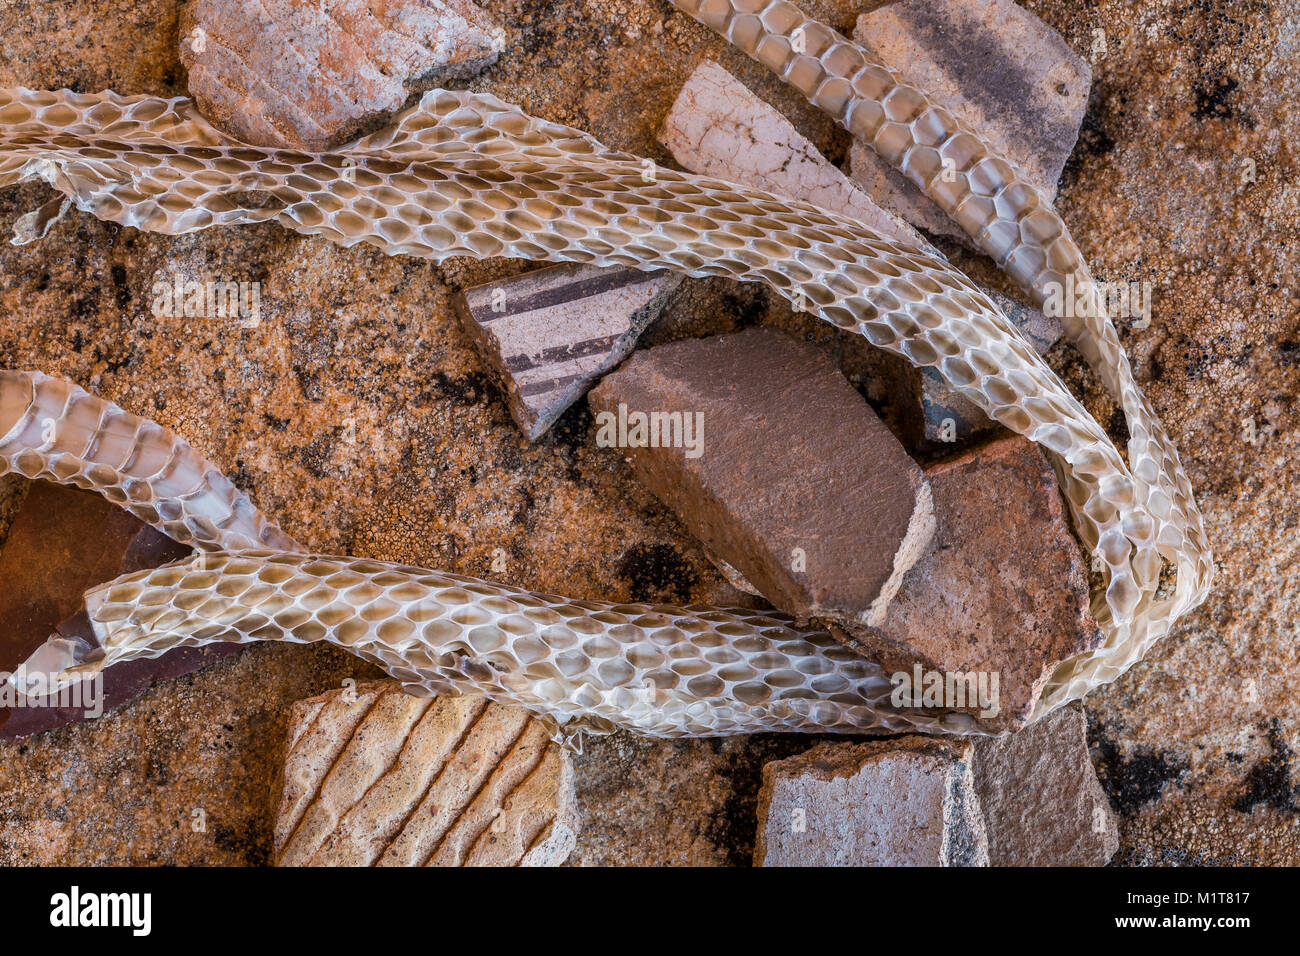 What Does a Rattlesnake Skin Look Like?